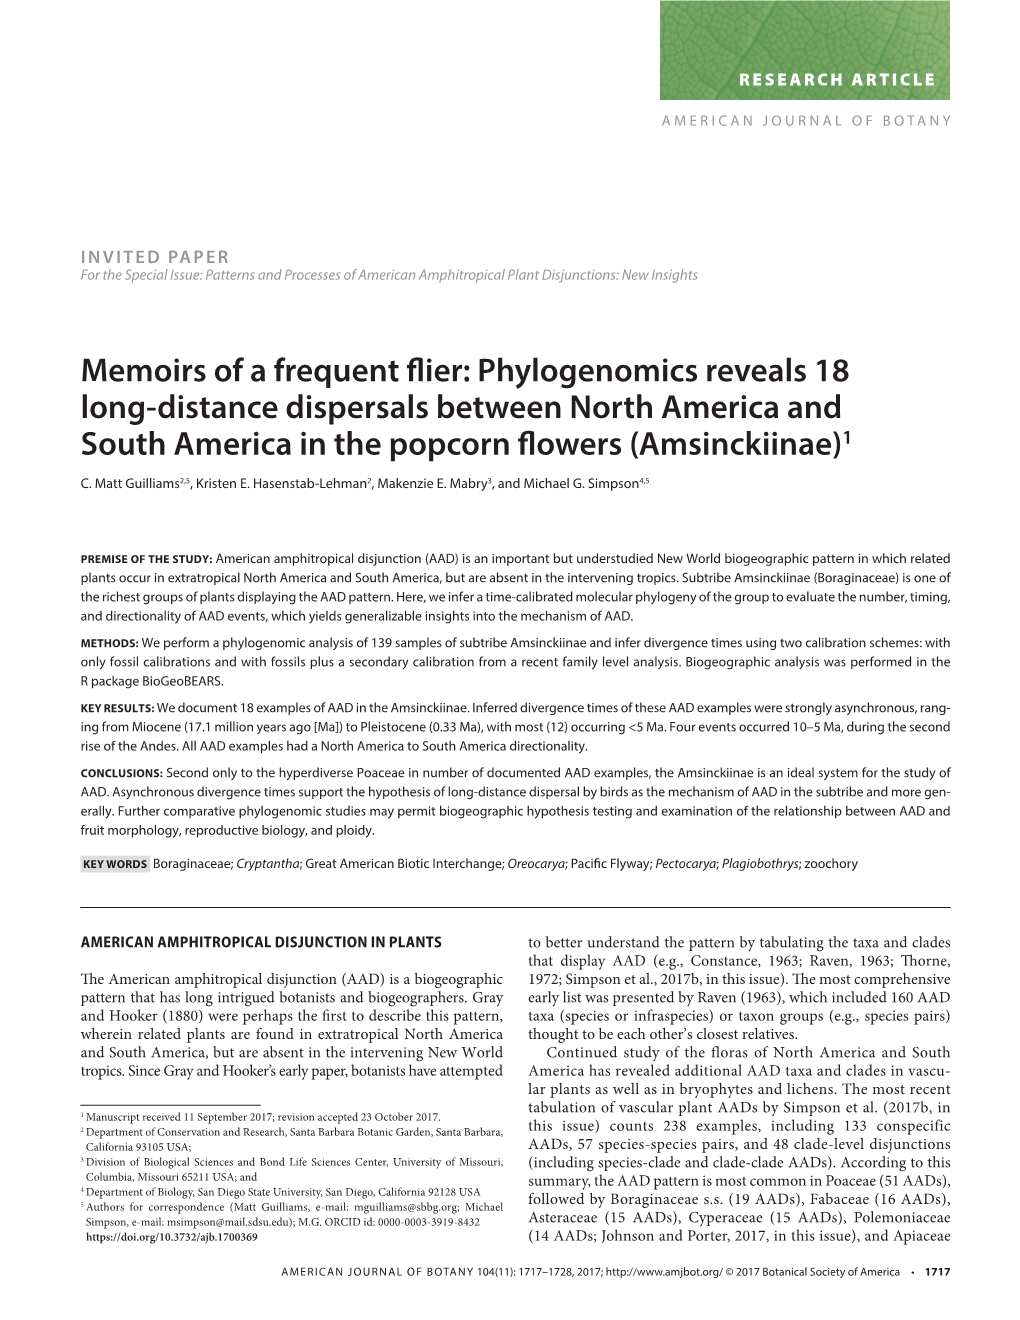 Phylogenomics Reveals 18 Long-Distance Dispersals Between North America and South America in the Popcorn Fl Owers (Amsinckiinae)1